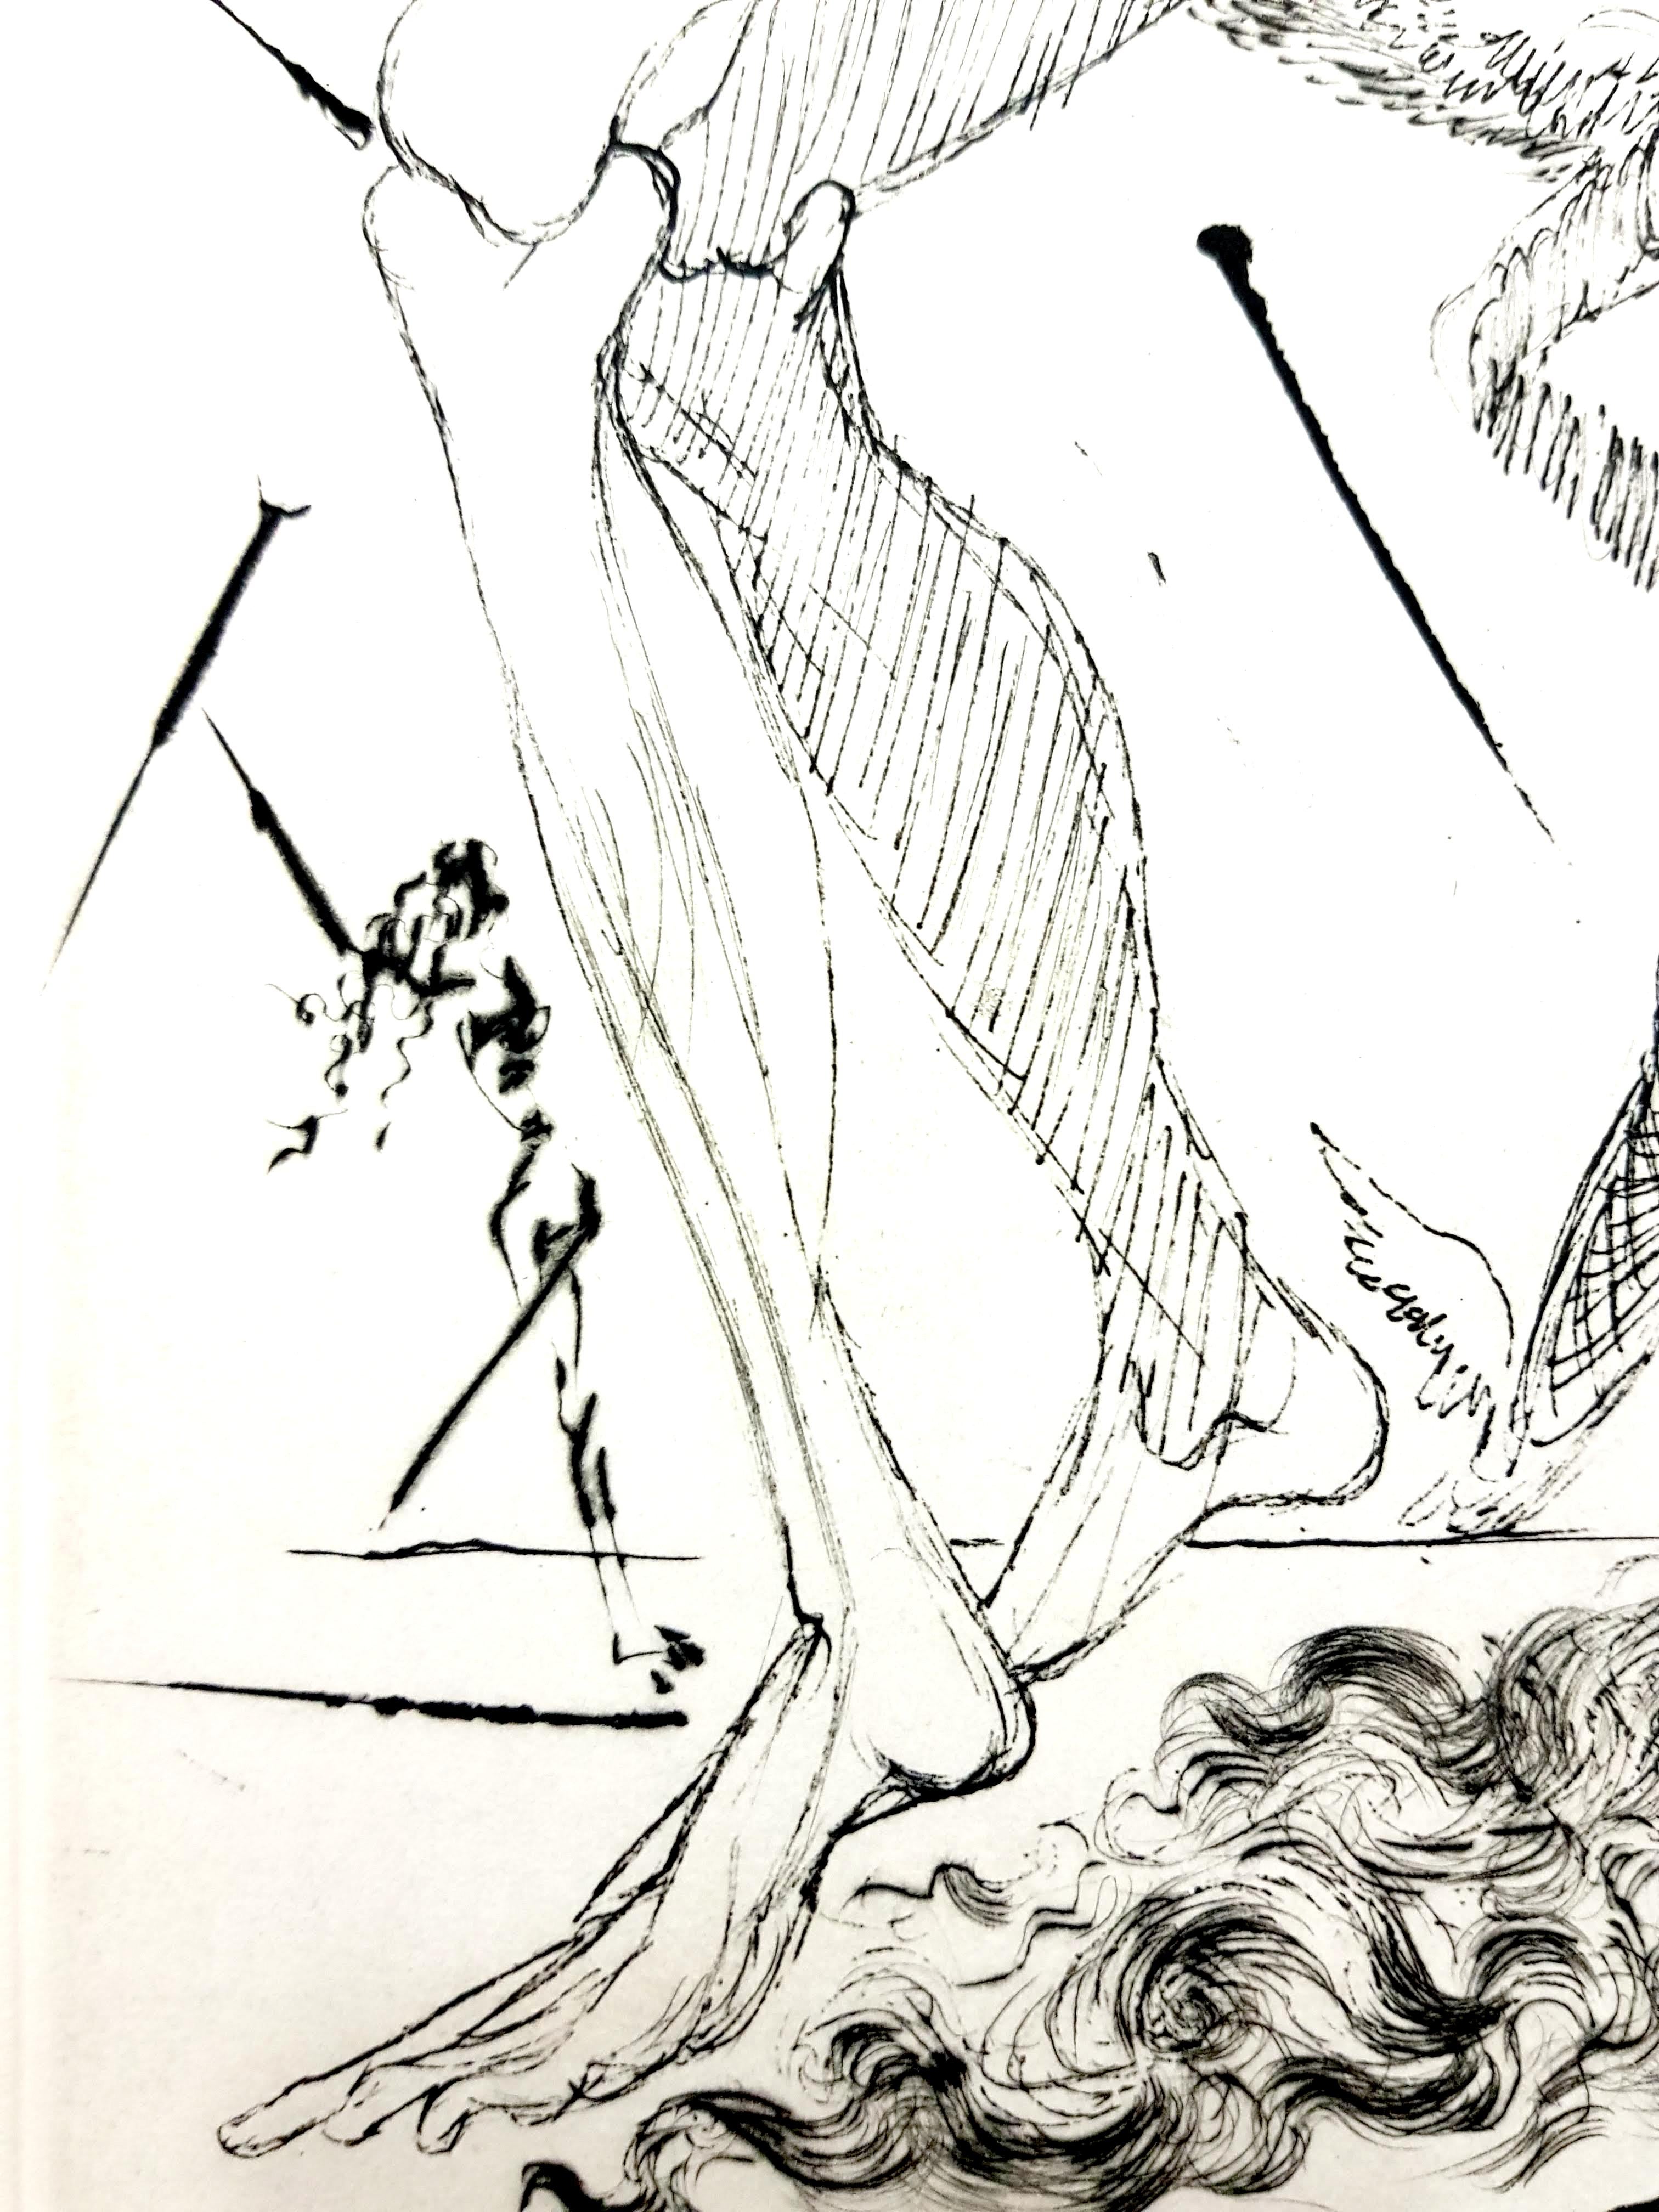 Salvador Dali - Nude with Snail - Original Etching
Dimensions: 38 x 28 cm
Edition: 235
1967
embossed signature
On Arches Vellum
References : Field 67-10 (p. 34-35)